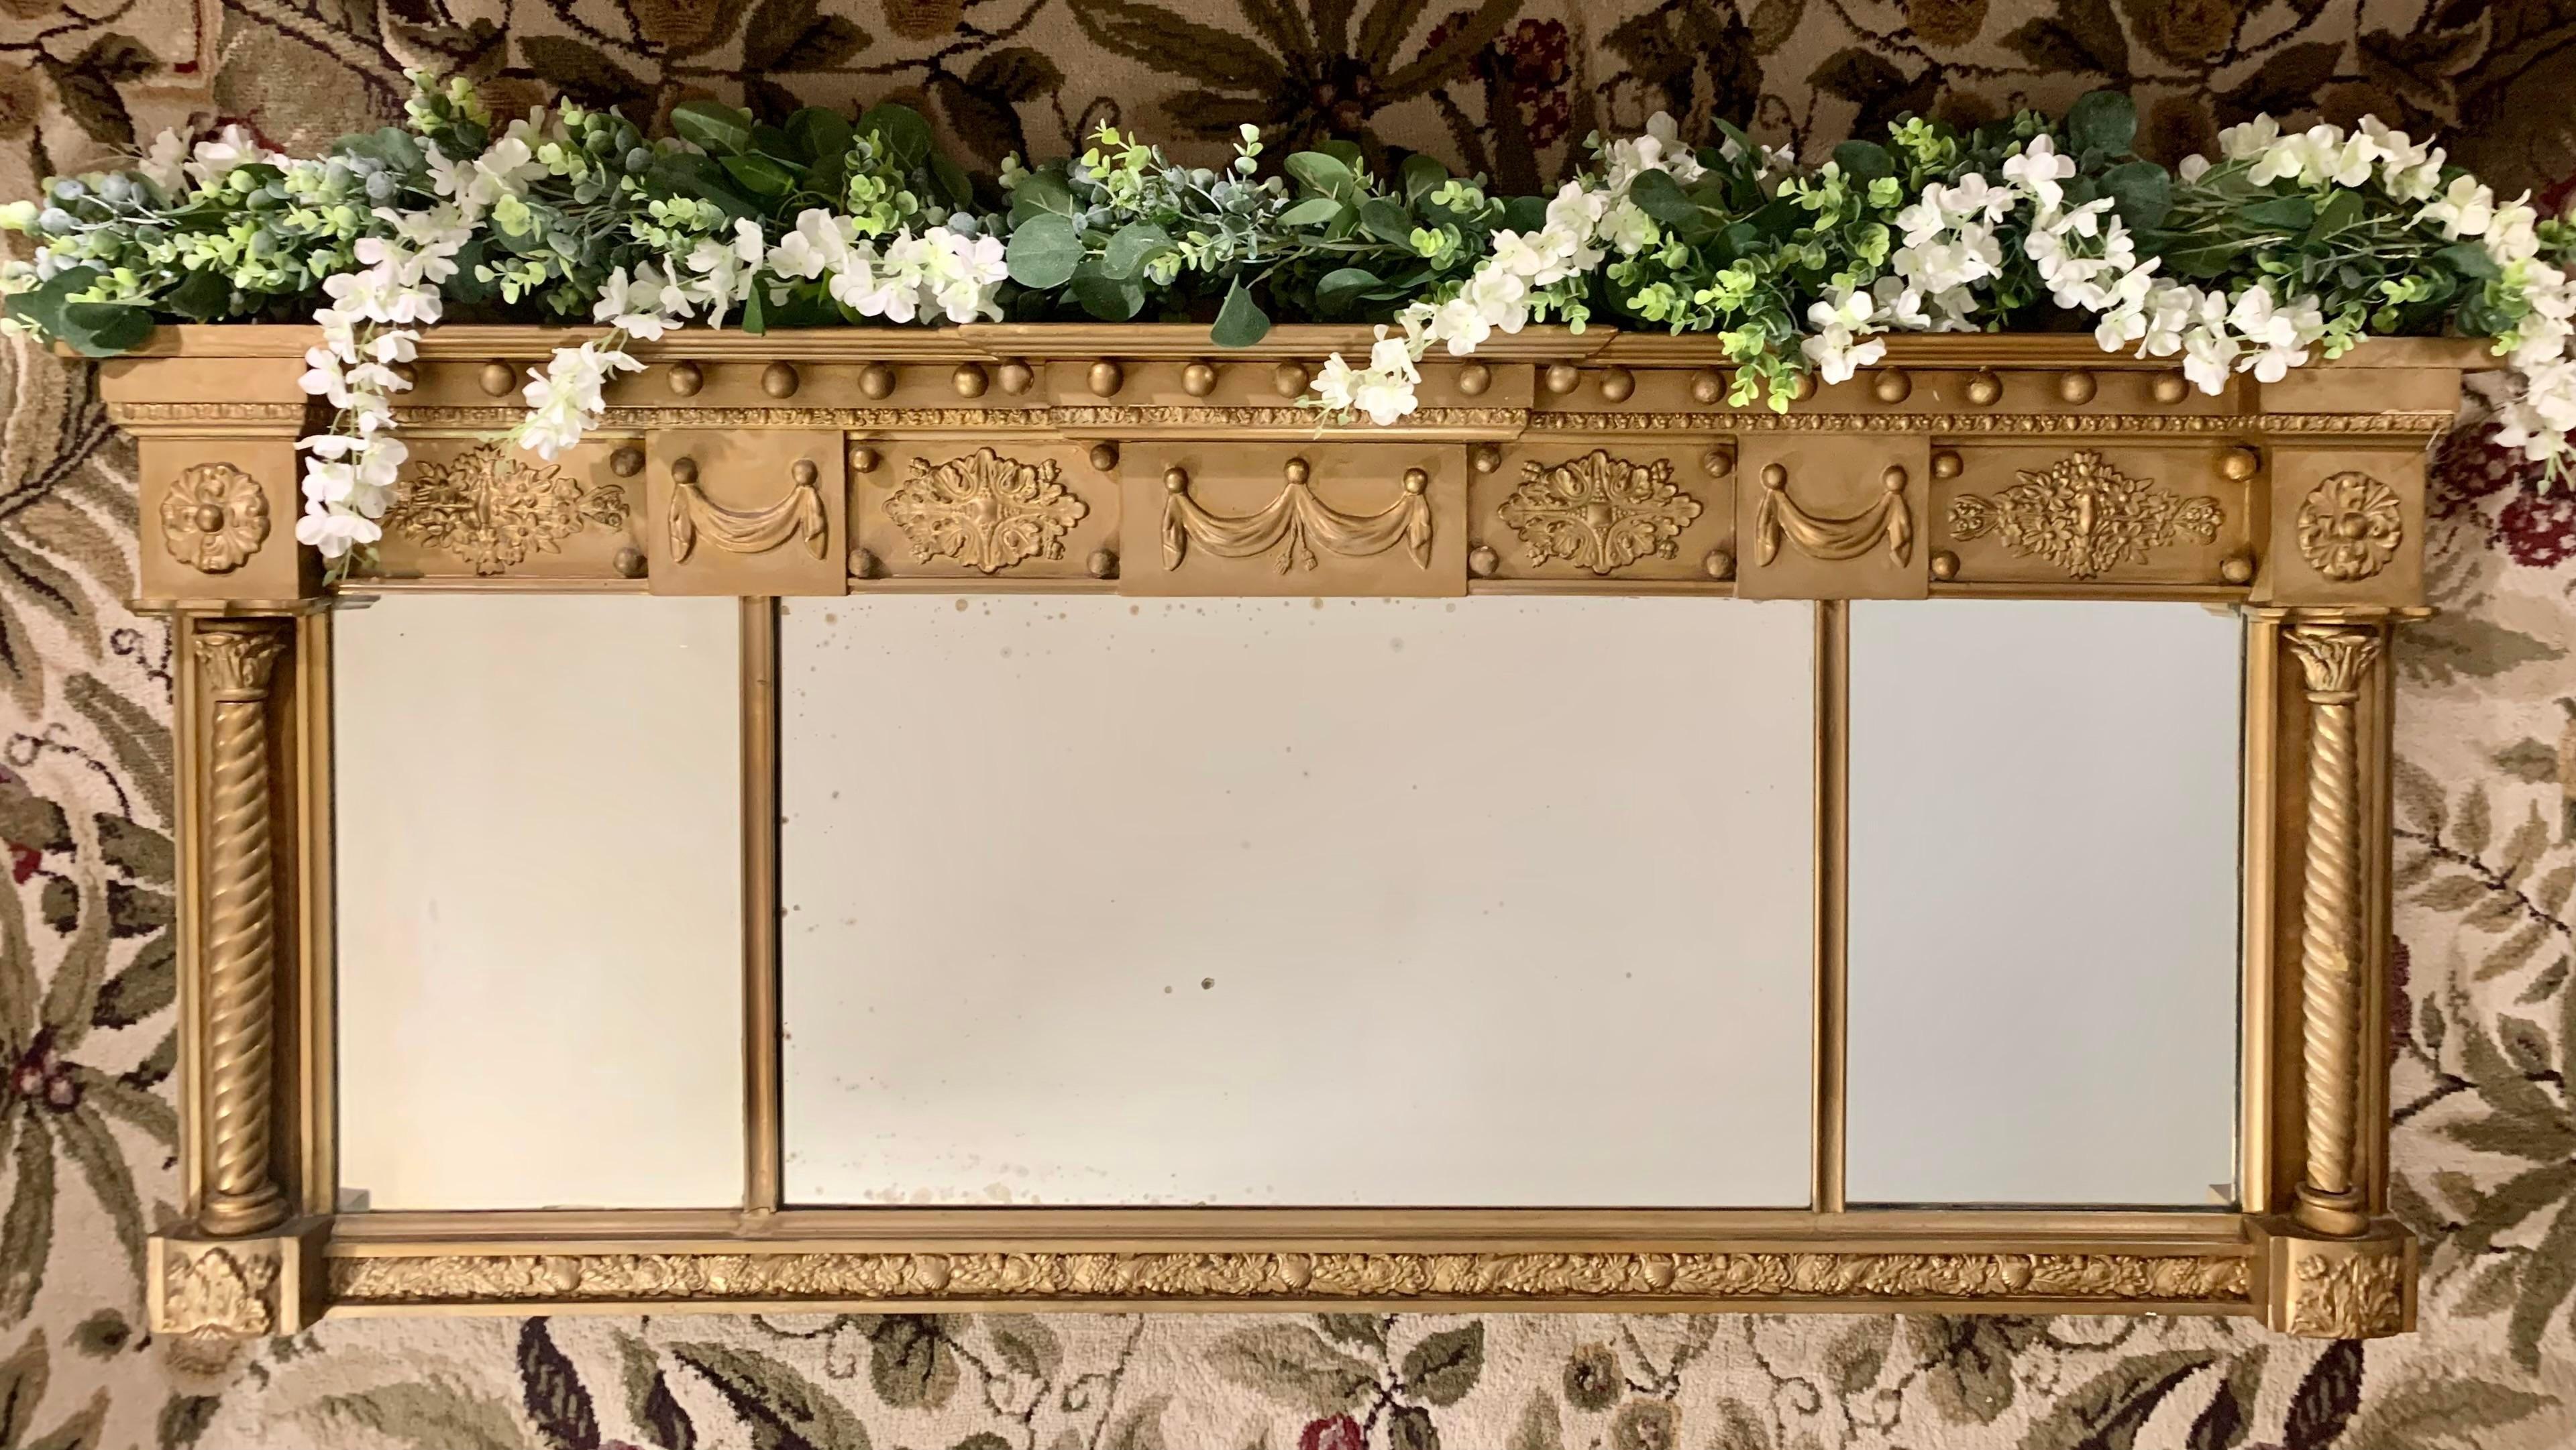 Made in England, circa 1820, this antique triple panel overmantel mirror with individualized mirror plates and exquisite polychrome giltwood carved and cast detail, is prepared to make an elegant, historical statement in your home.

Originally